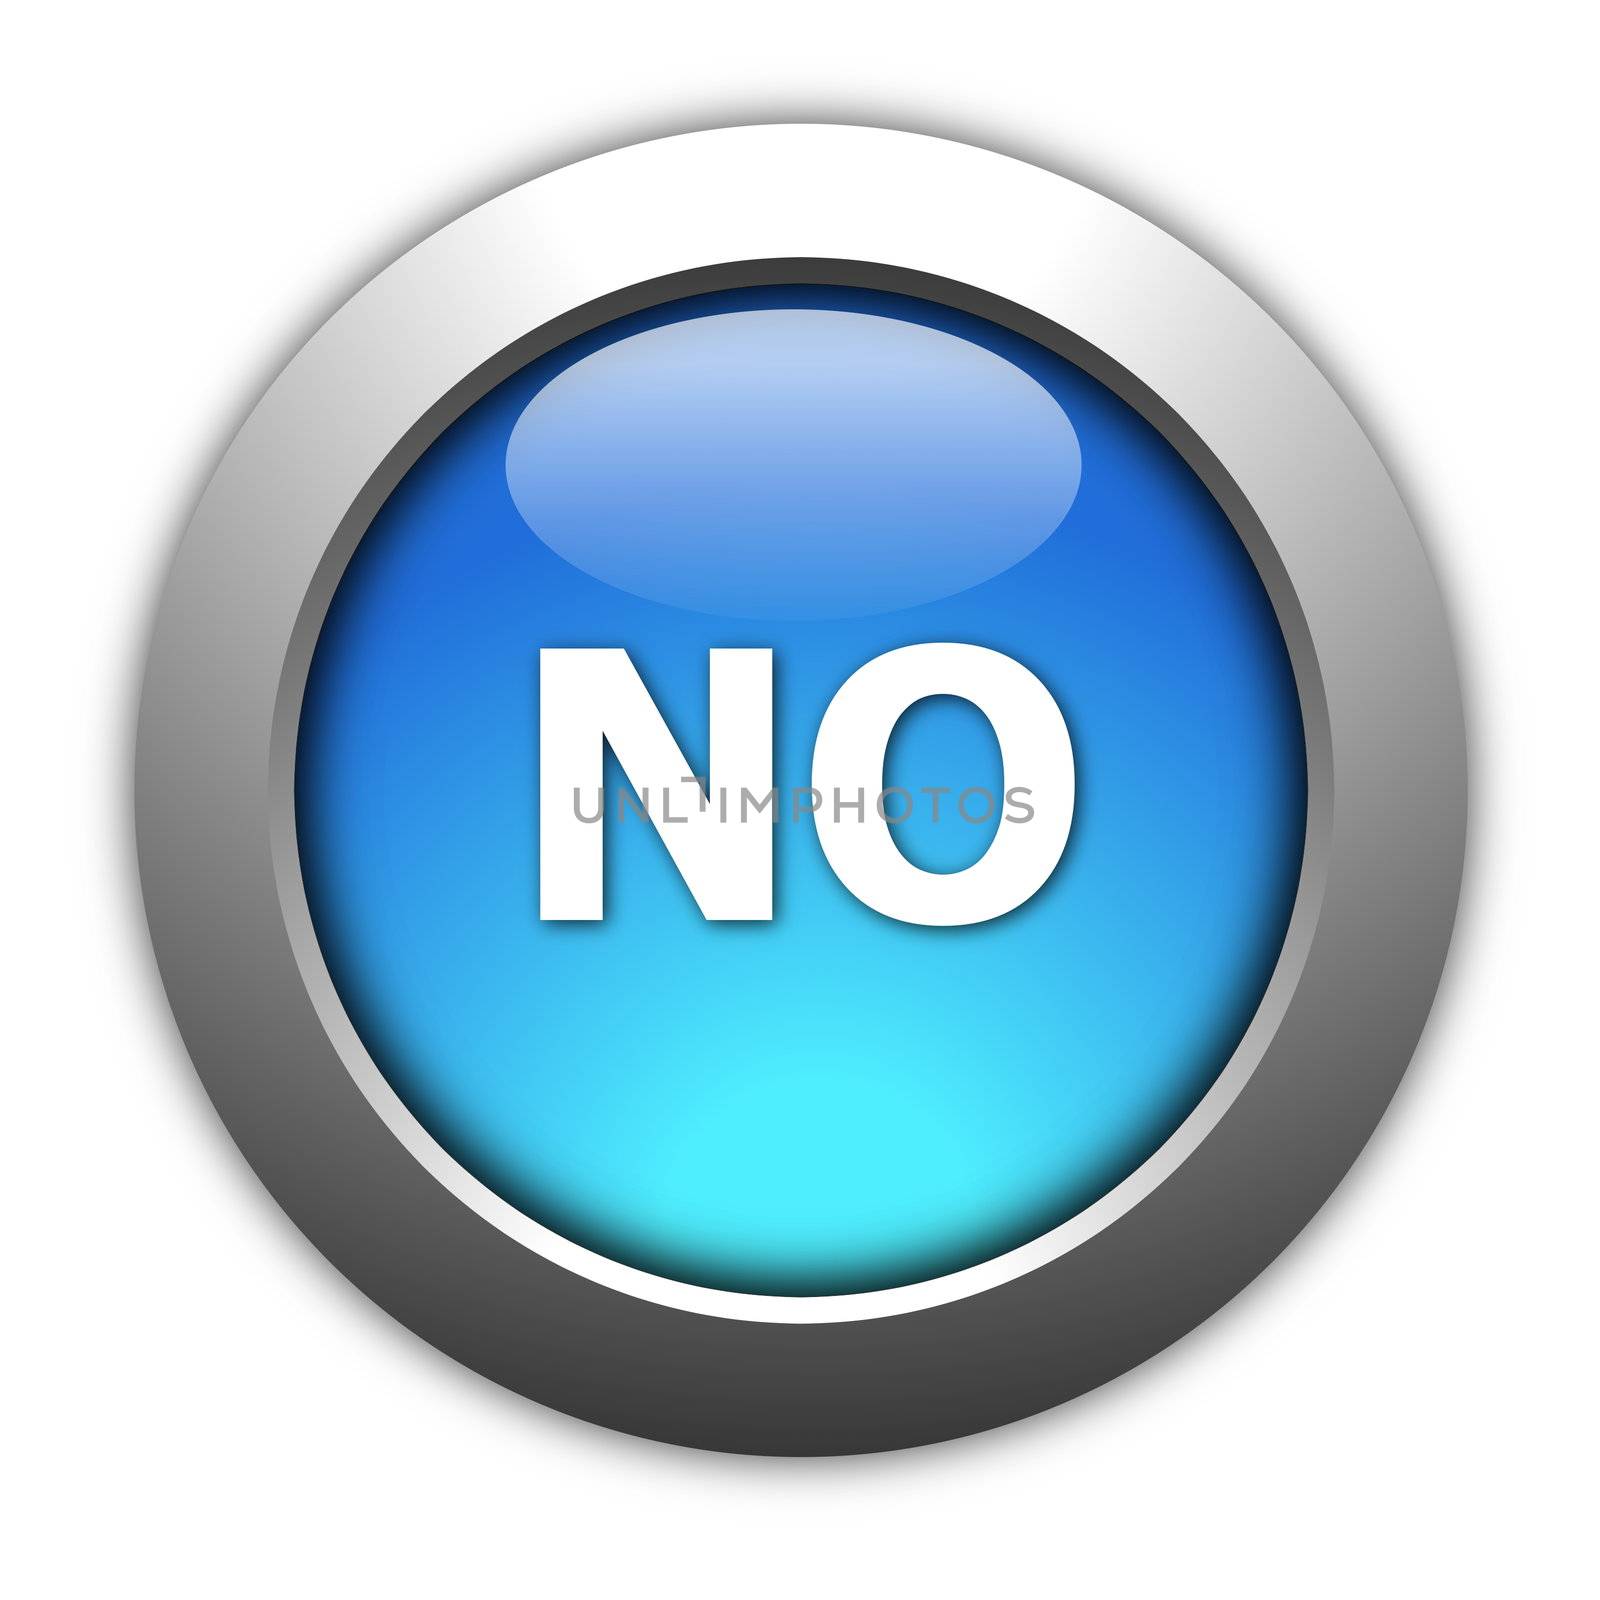 yes and no button by gunnar3000